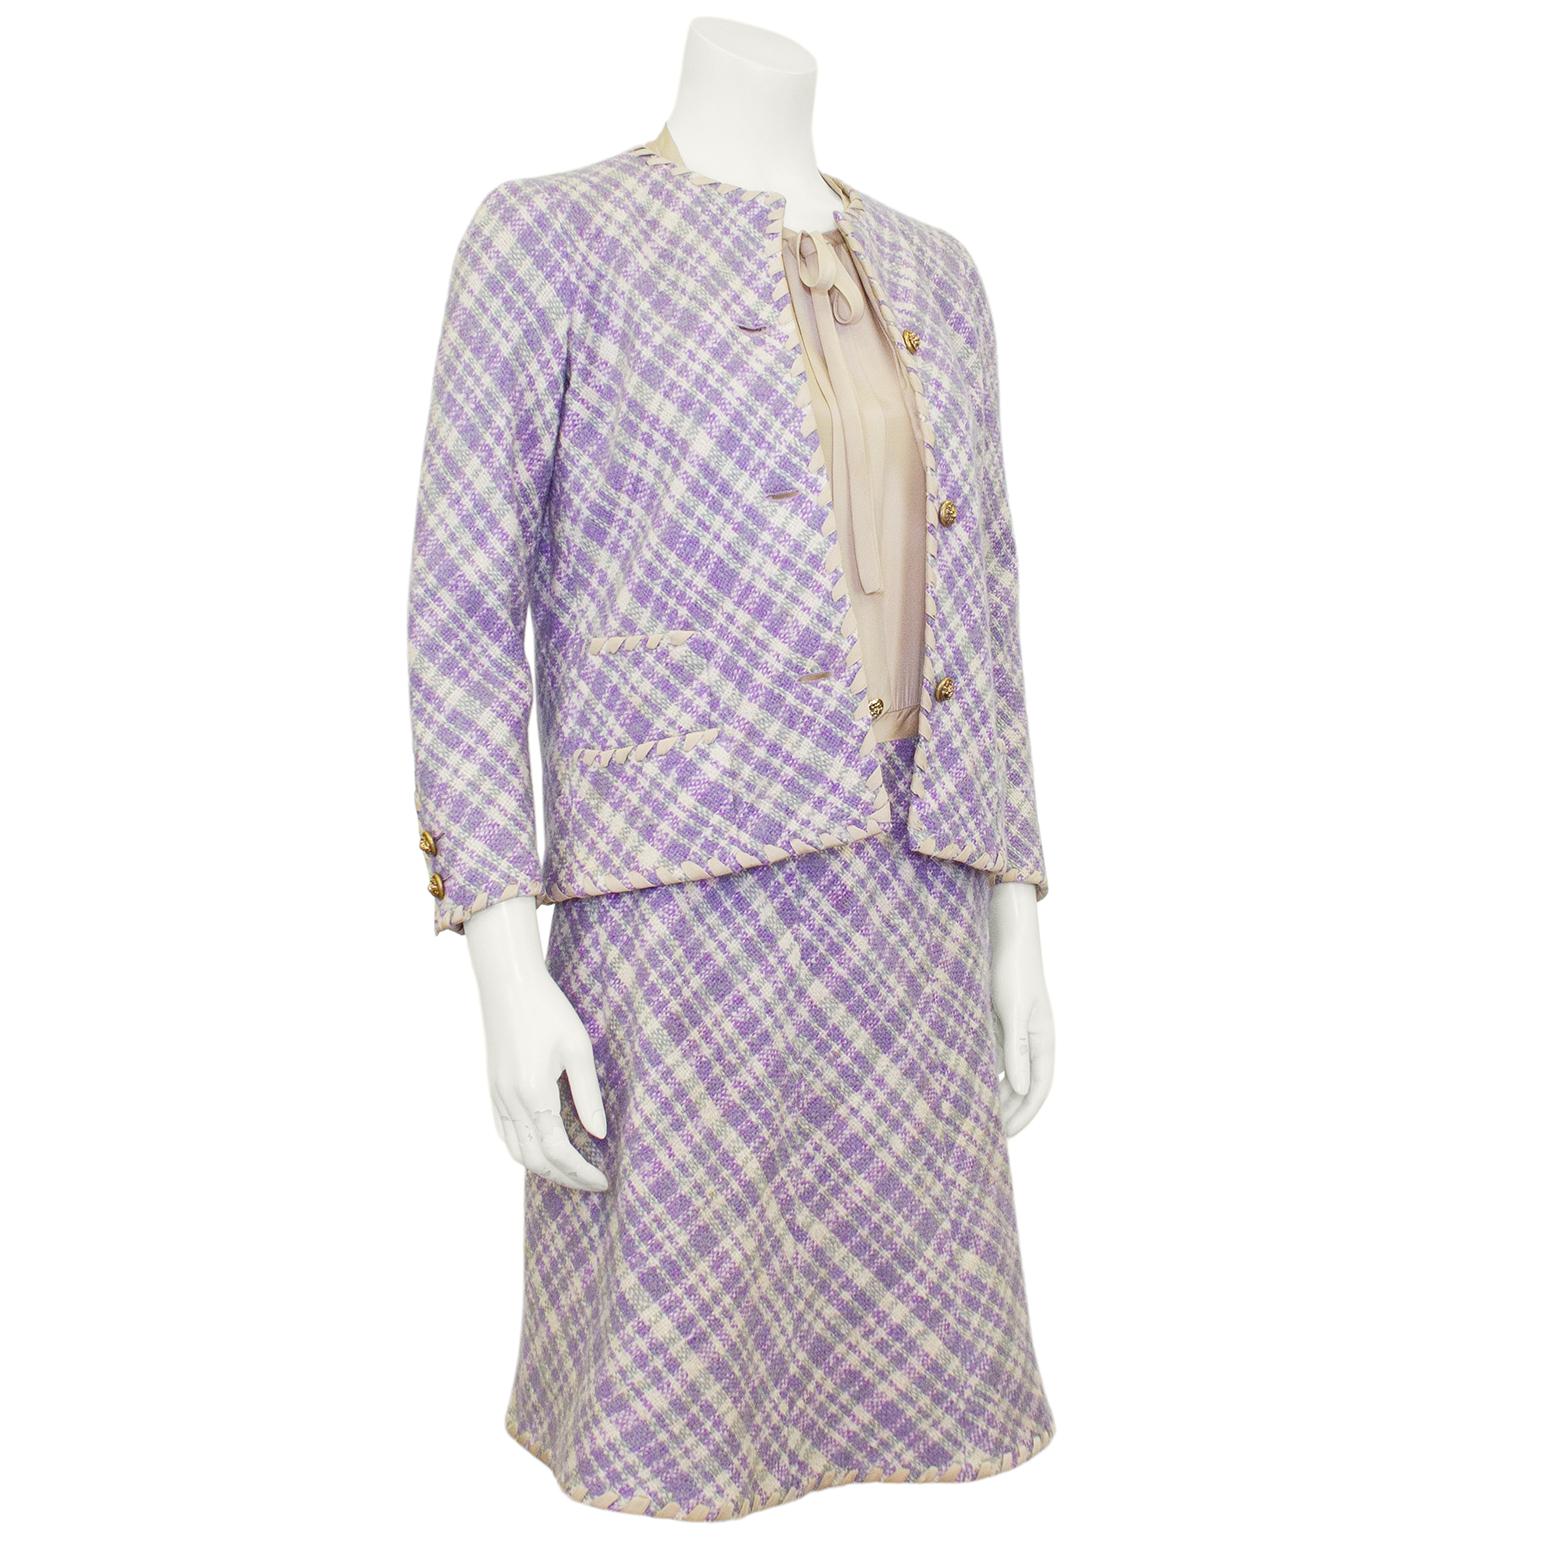 Extremely beautiful lightweight wool tweed 1960s Chanel Haute Couture dress and jacket ensemble in the most gorgeous palette of lilac, sage green and beige. The jacket is collarless with double slit pockets on both hips and stunning gold tone metal